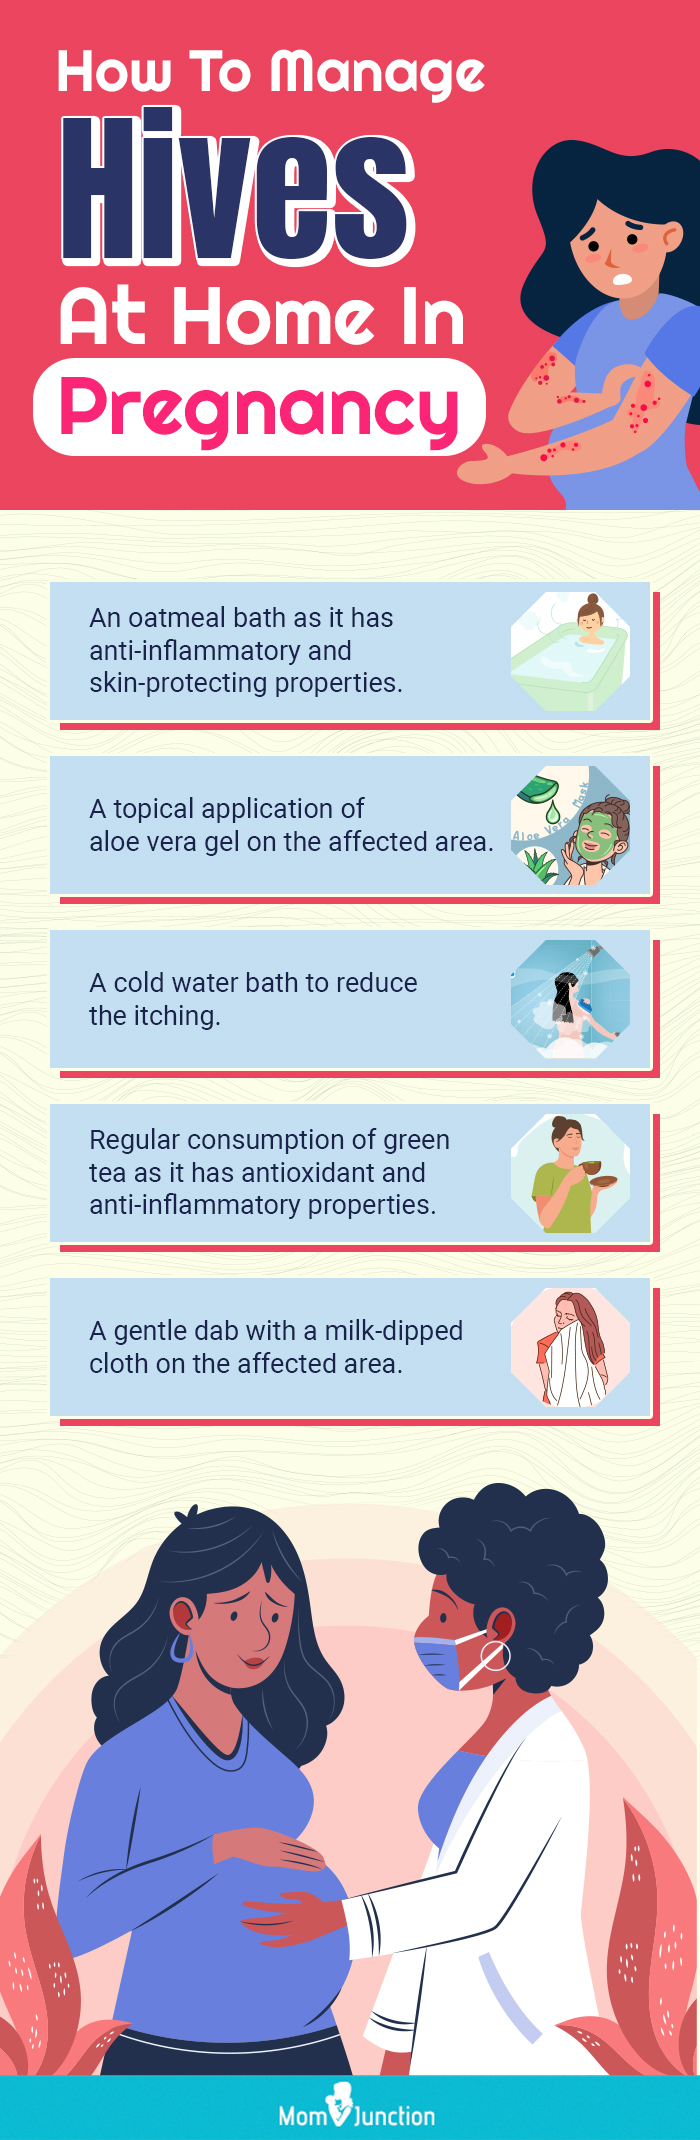 how to manage hives at home in pregnancy (infographic)